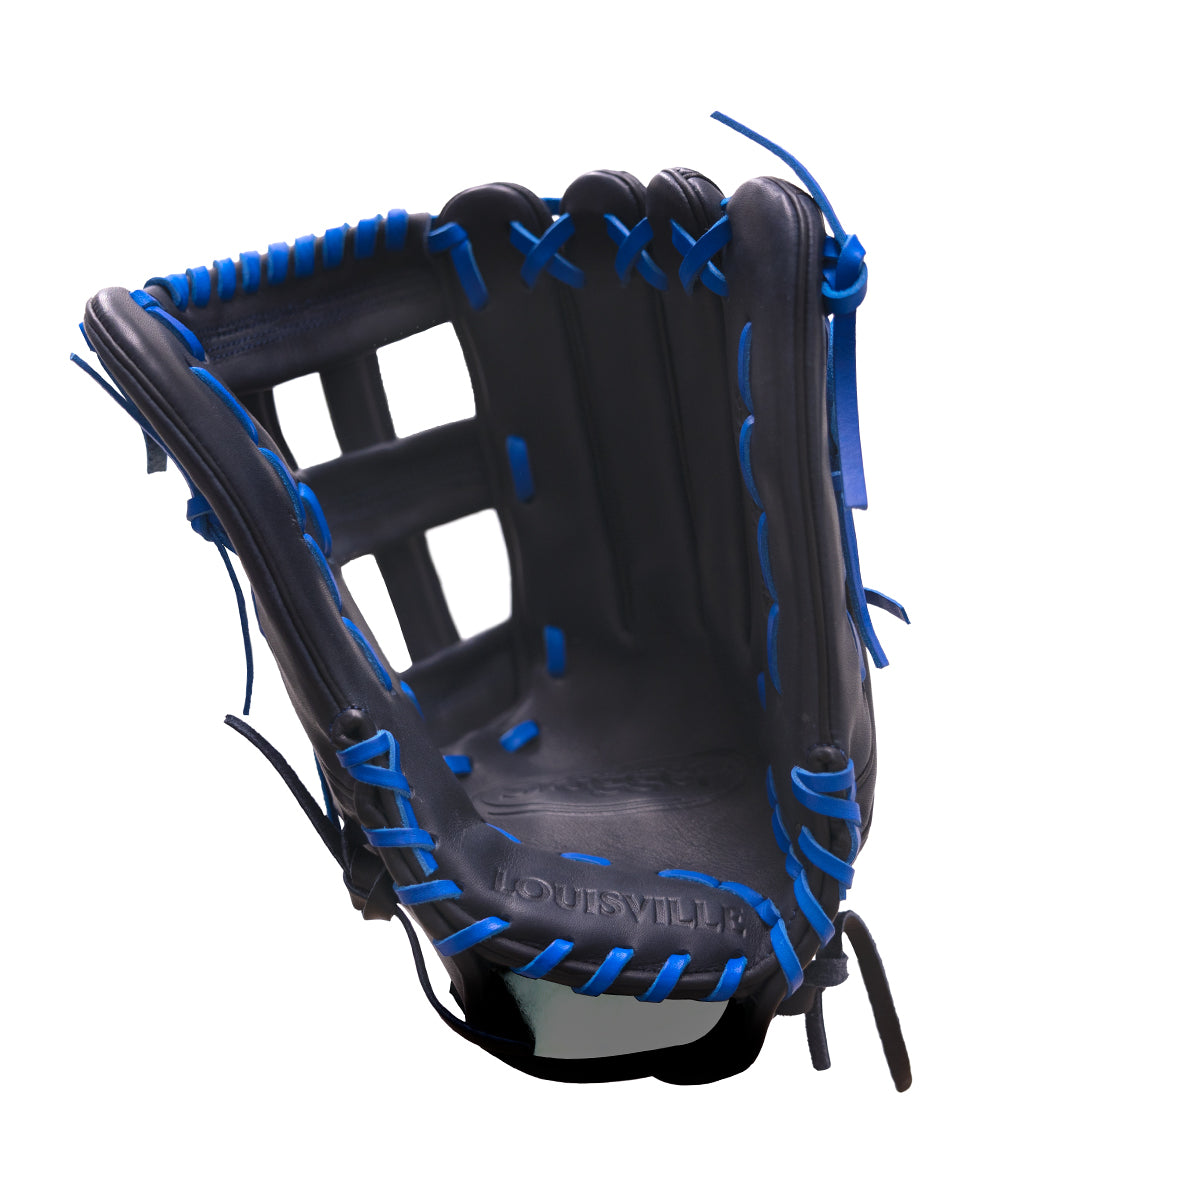 Past Time Sports: The Chief Baseball Glove